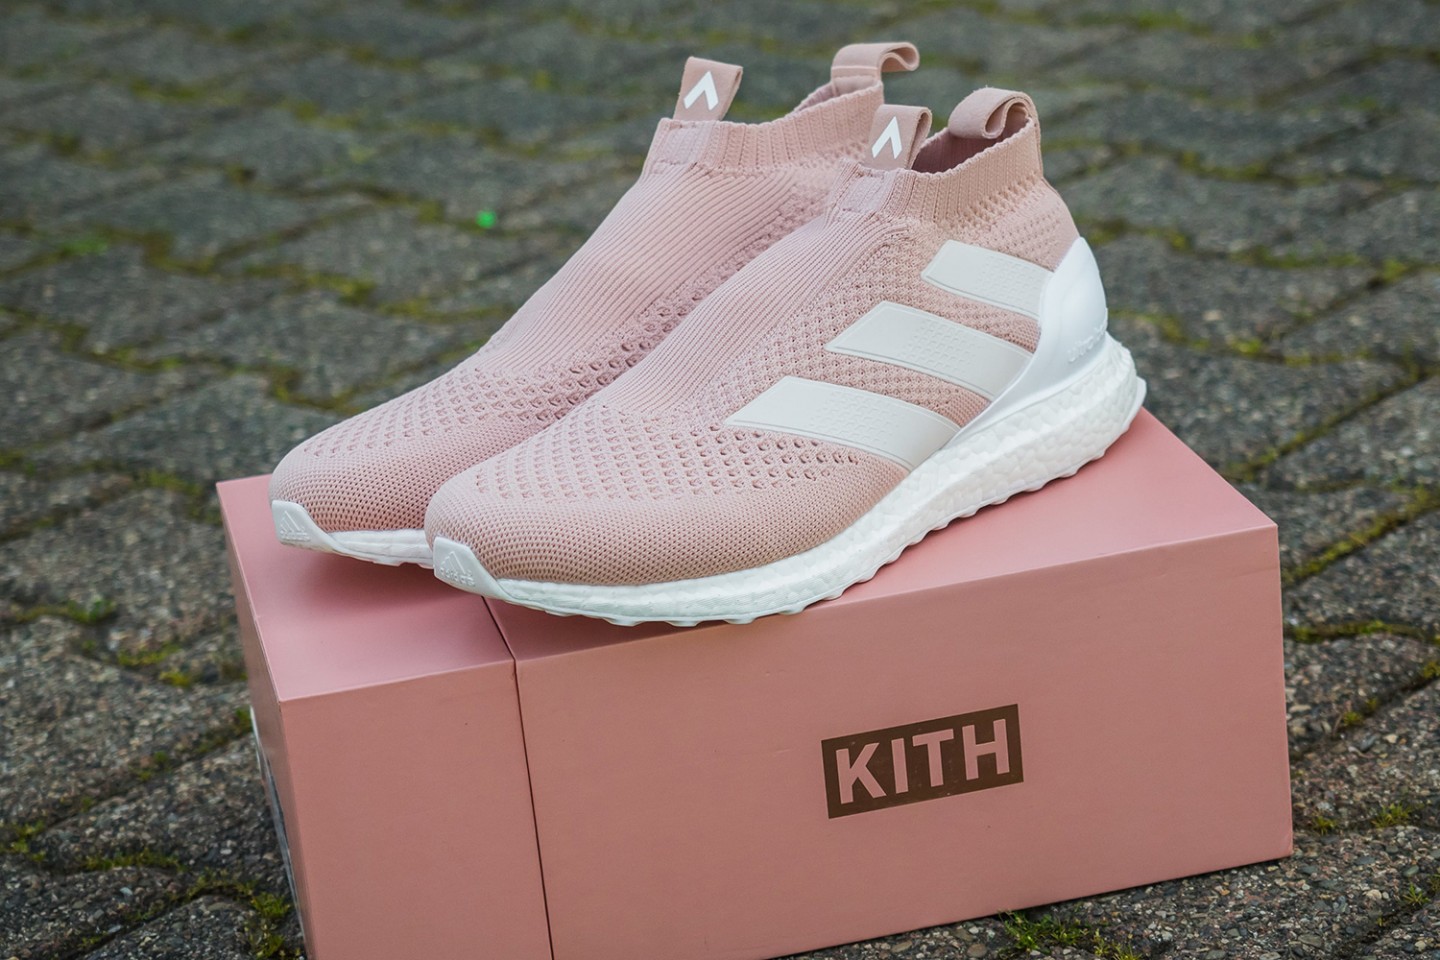 giay the thao adidas 2017 - adidas x Kith Ace 16+ PureControl Ultra Boost - elle man 3